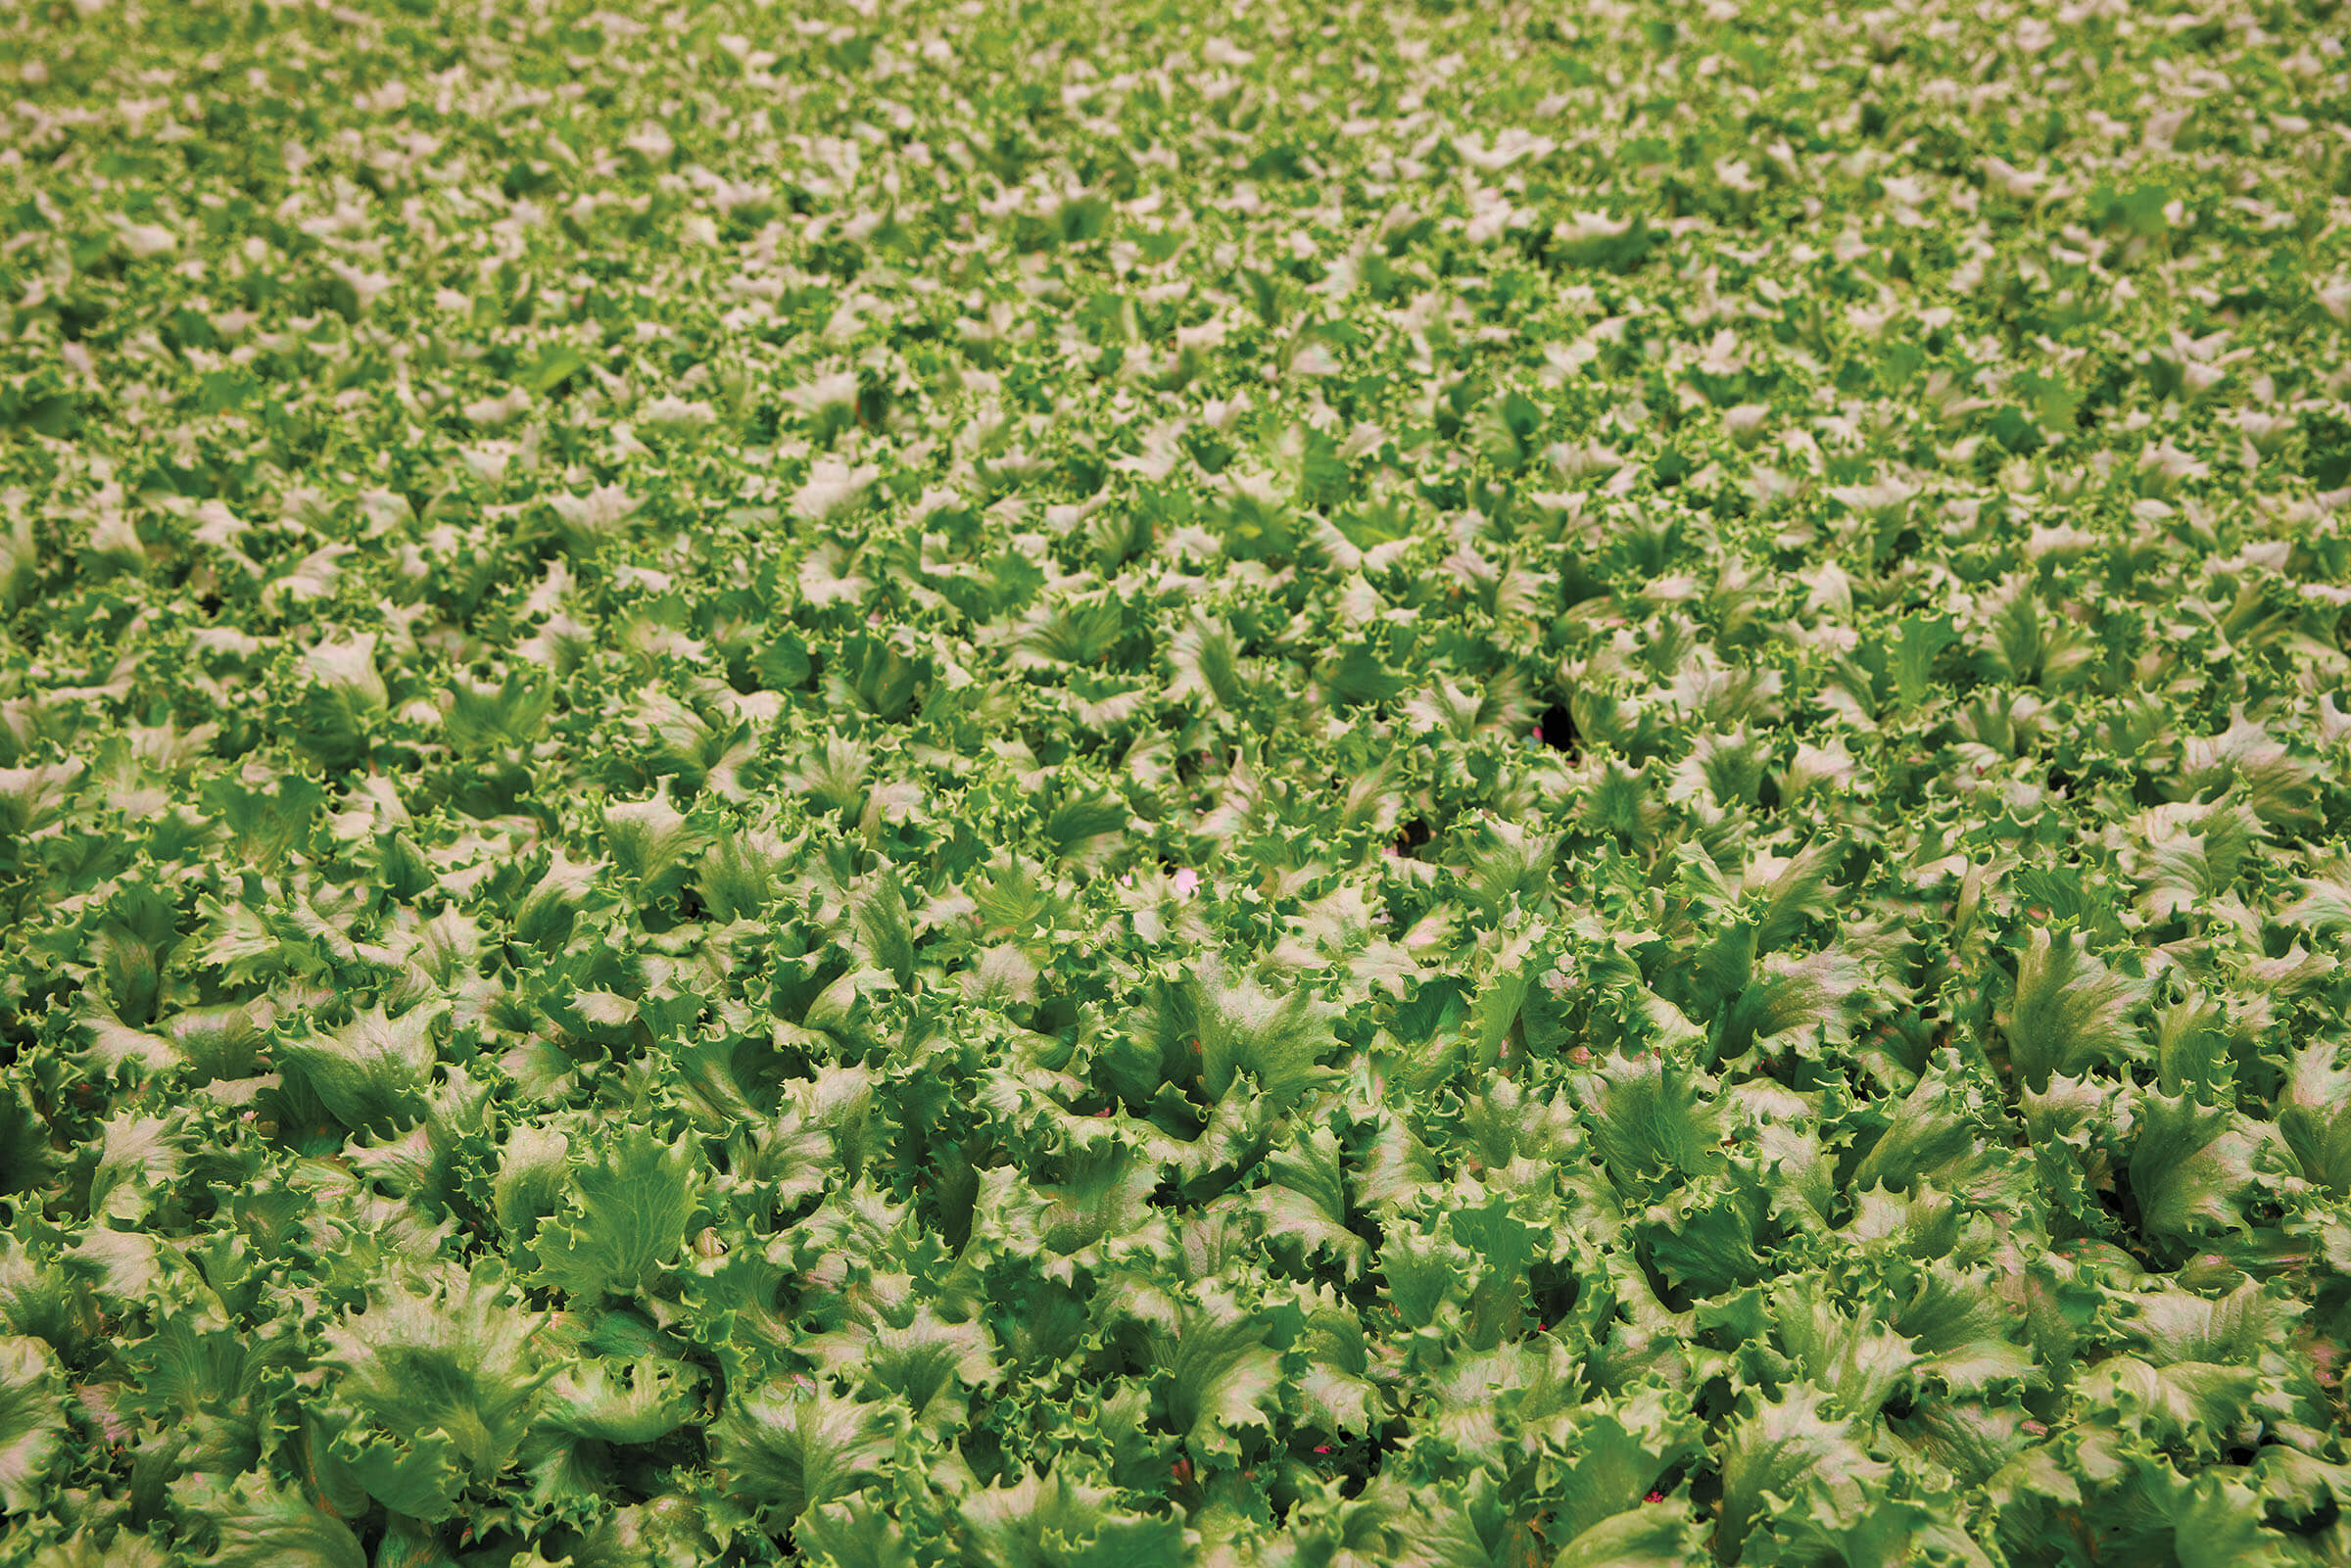 A large field of lettuce leaves under bright light